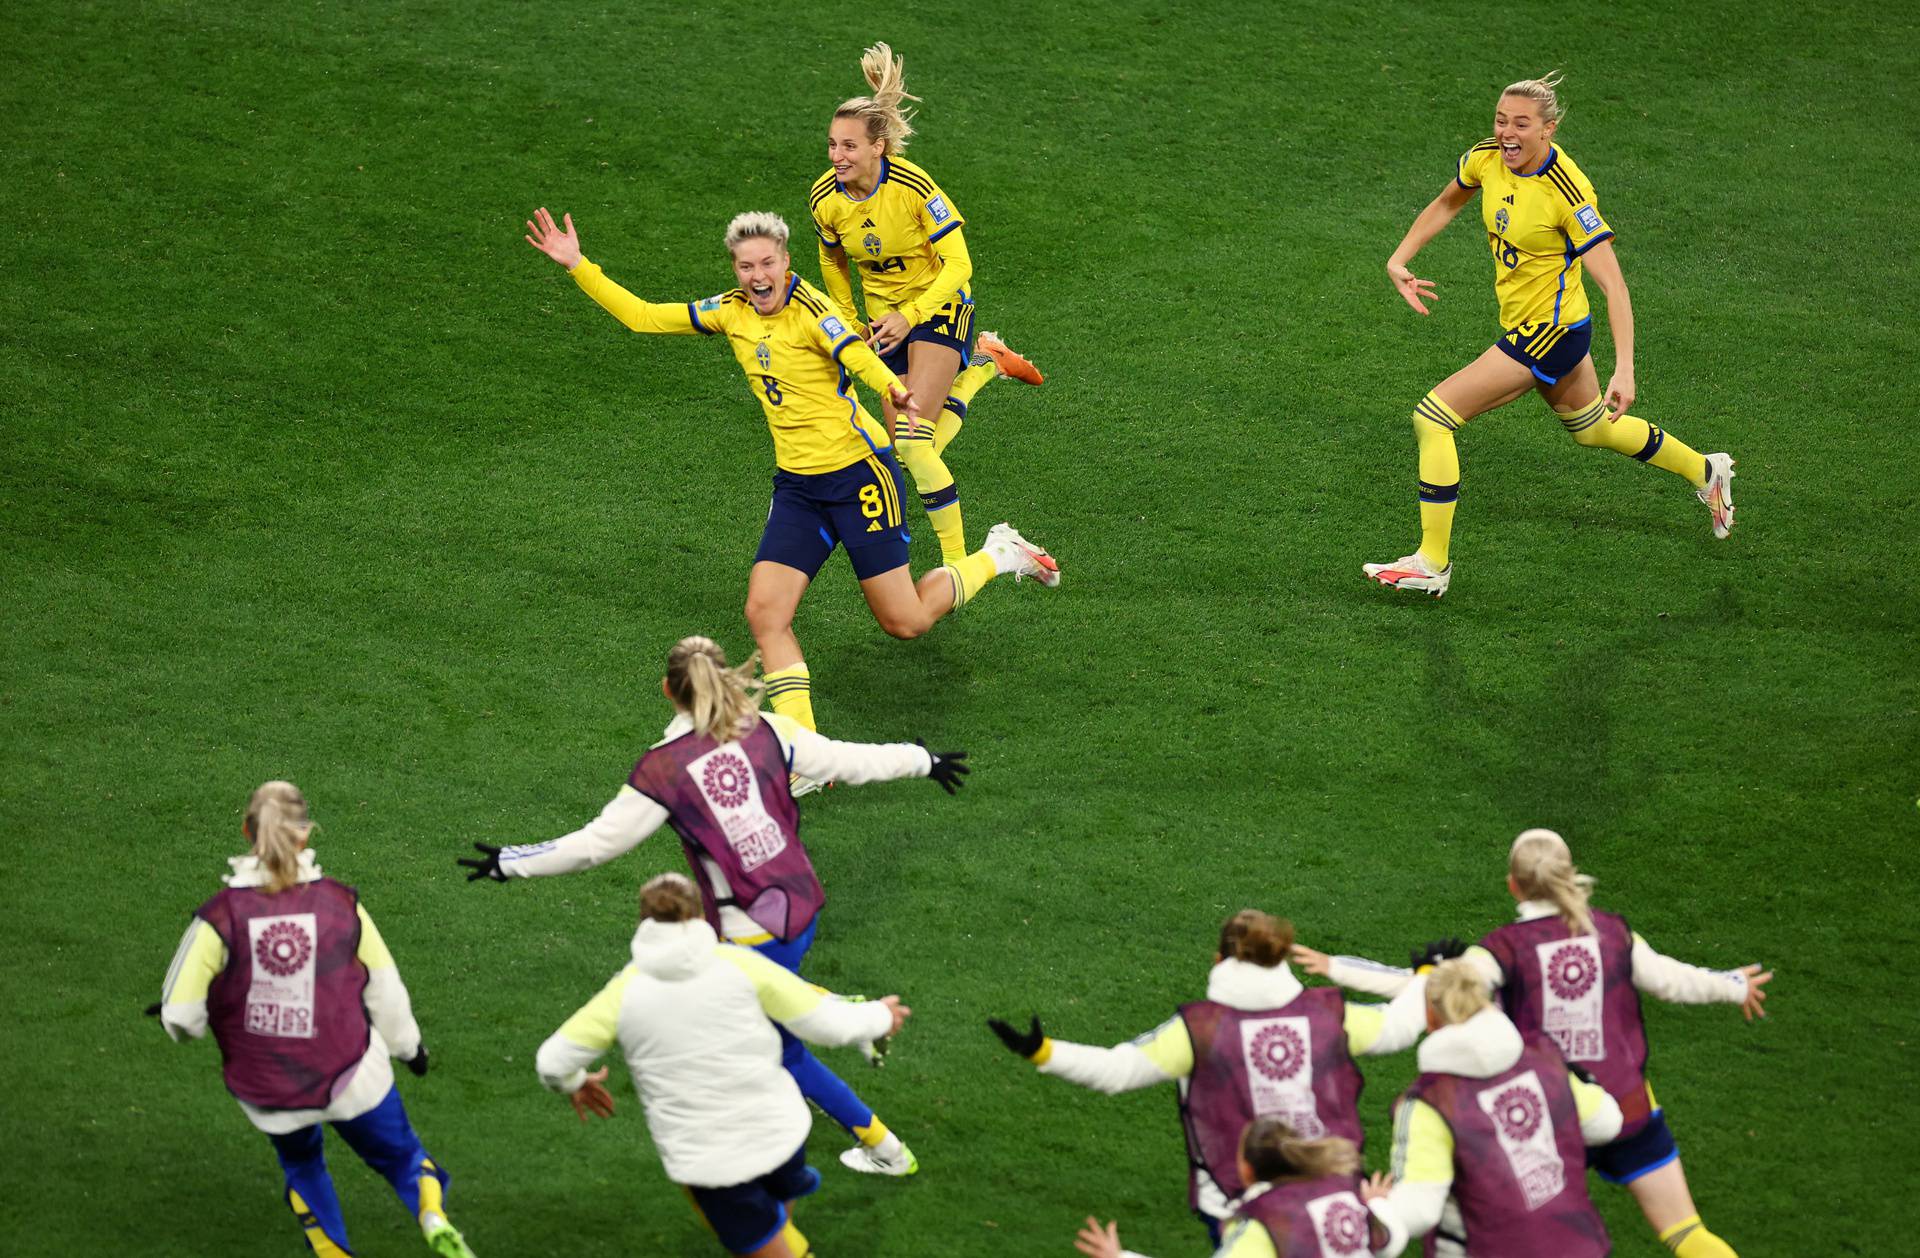 FIFA Women’s World Cup Australia and New Zealand 2023 - Round of 16 - Sweden v United States